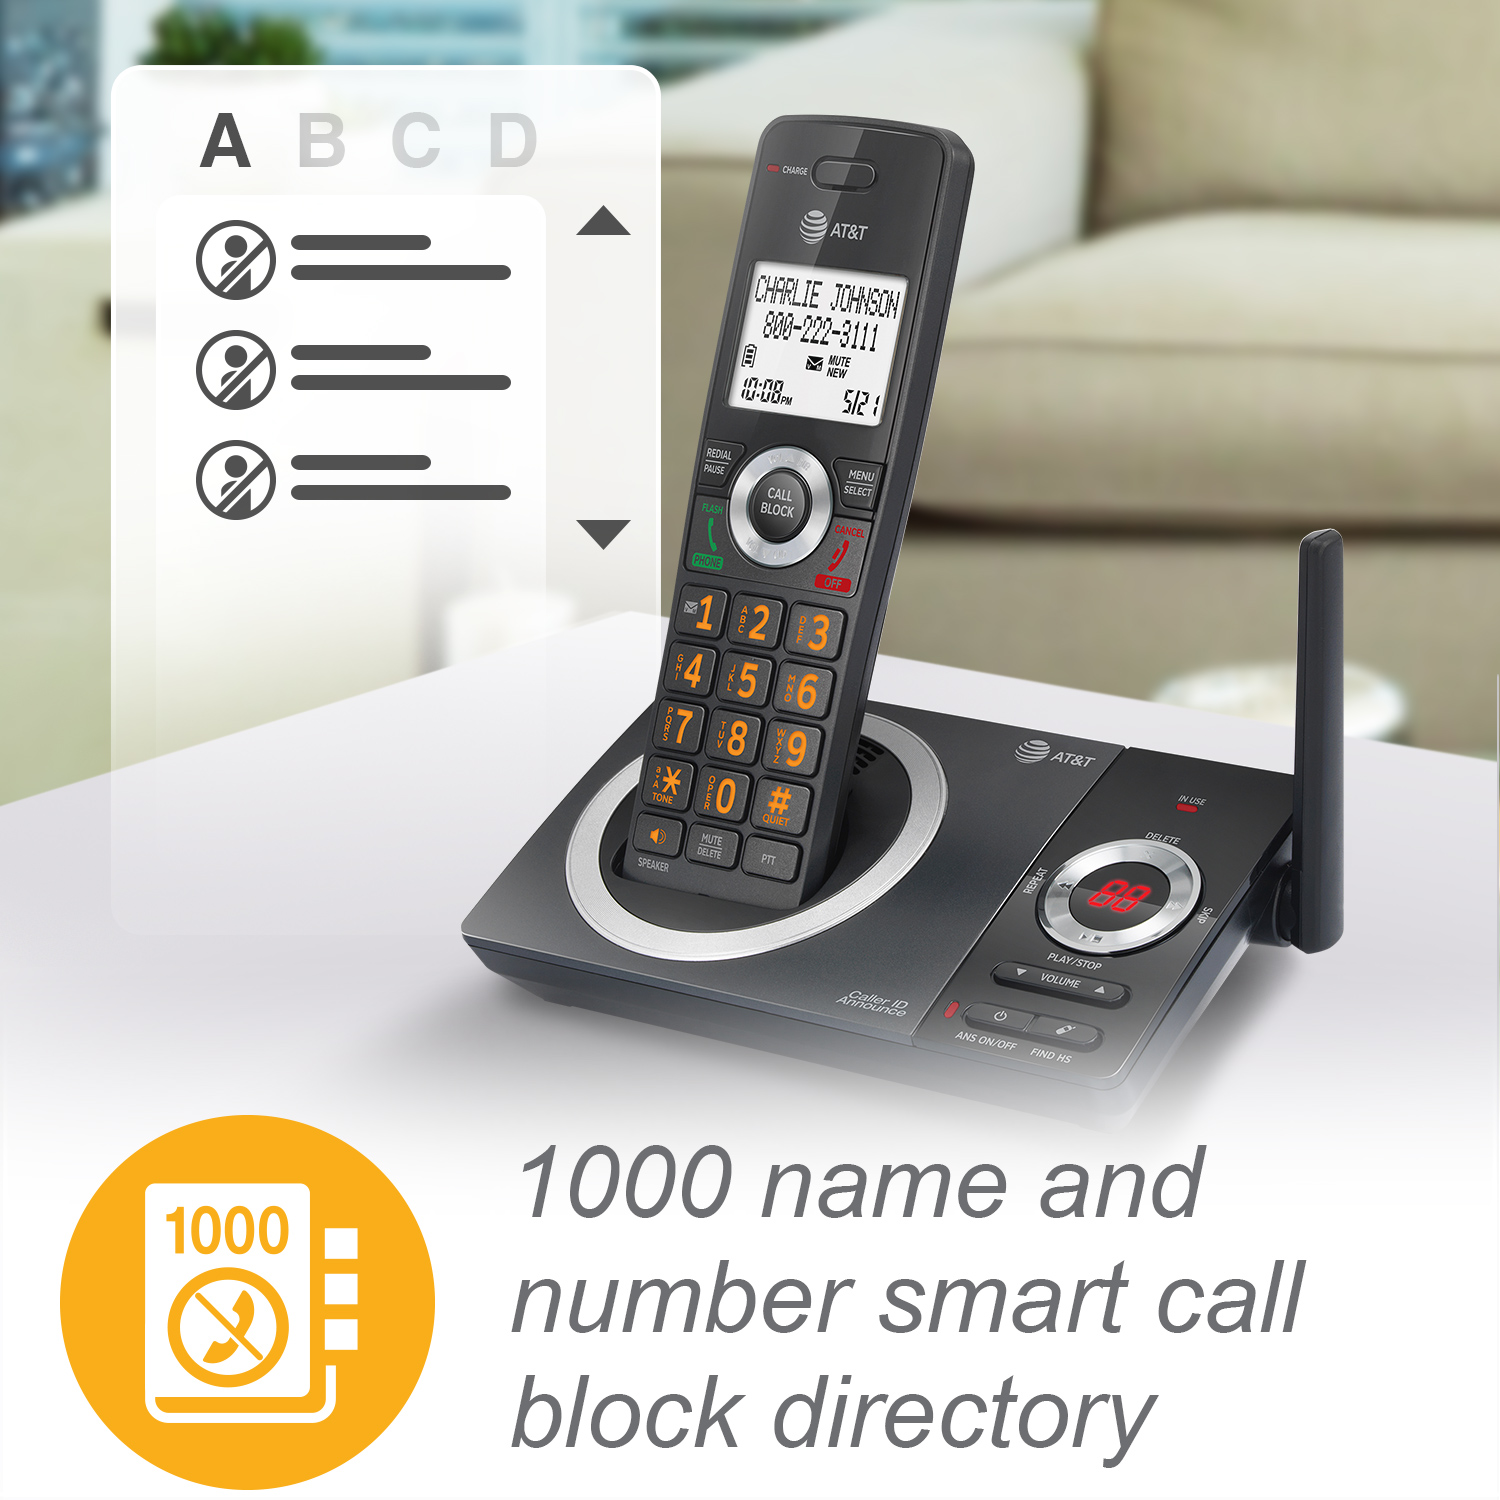 2-Handset Expandable Cordless Phone with Unsurpassed Range, Smart Call Blocker and Answering System - view 4